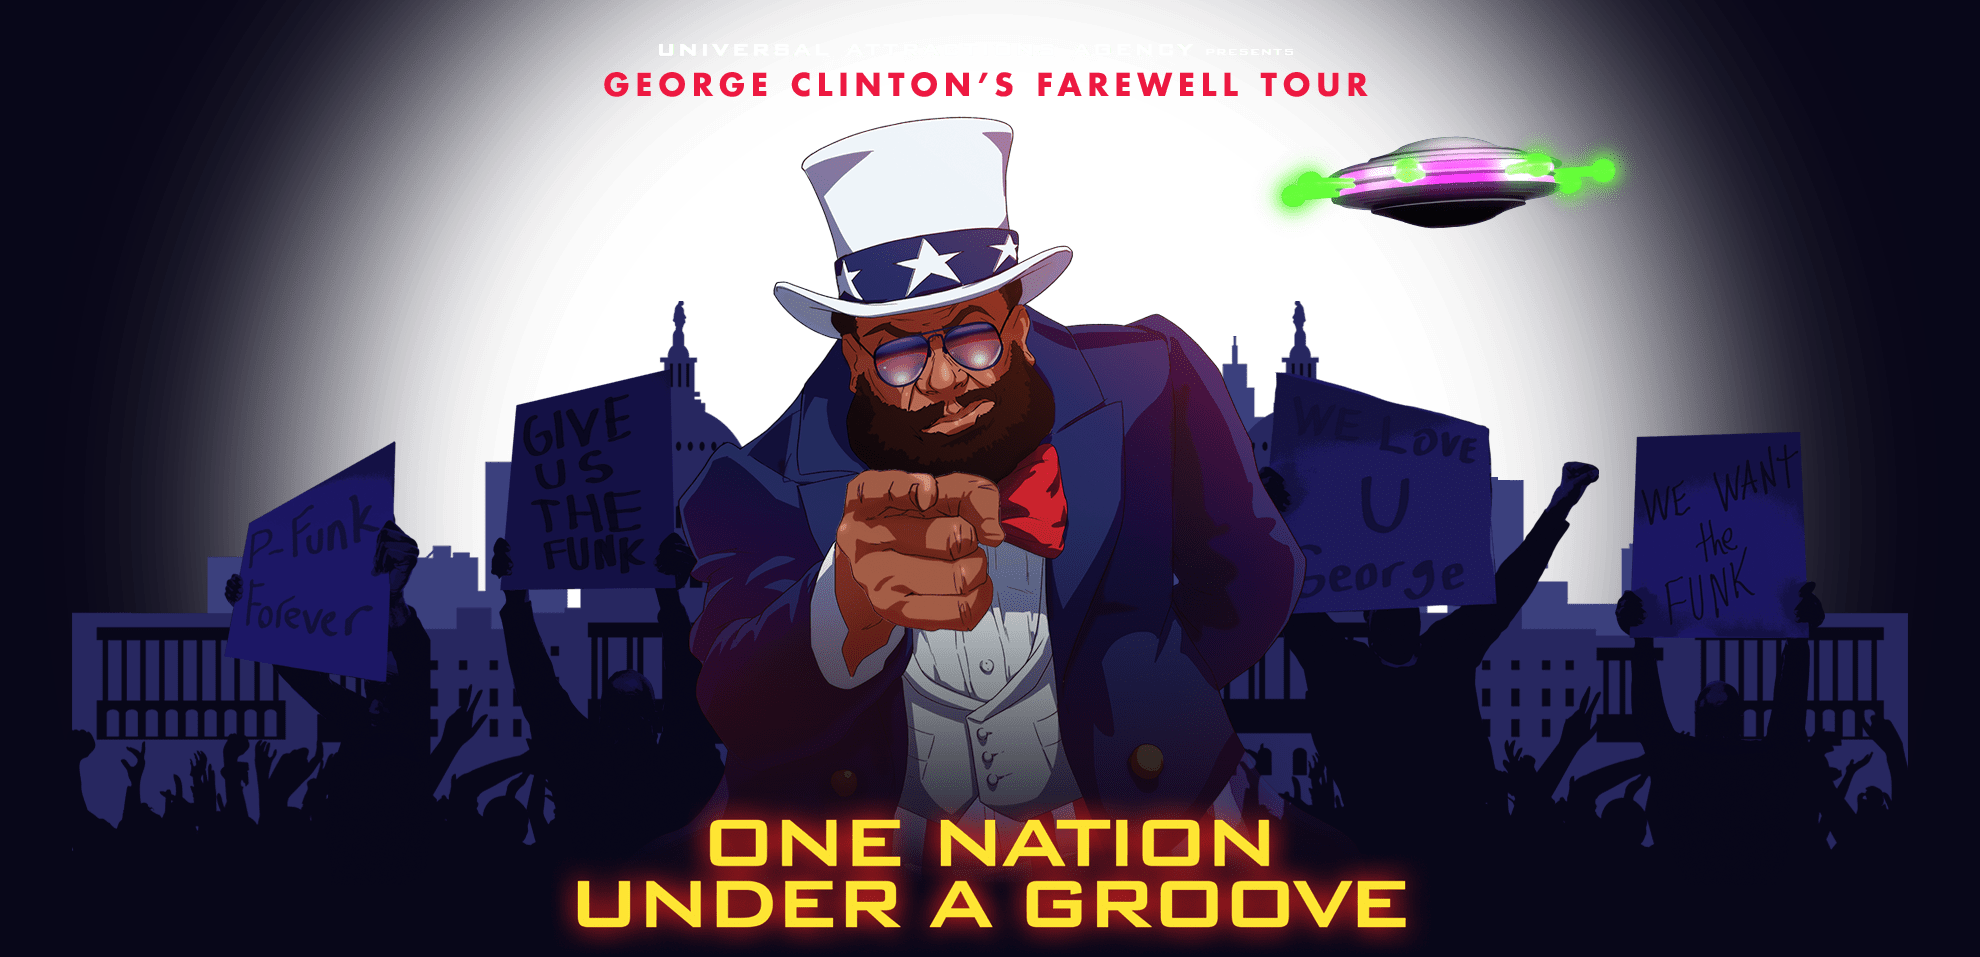 George Clinton's One Nation Under a Groove Tour  